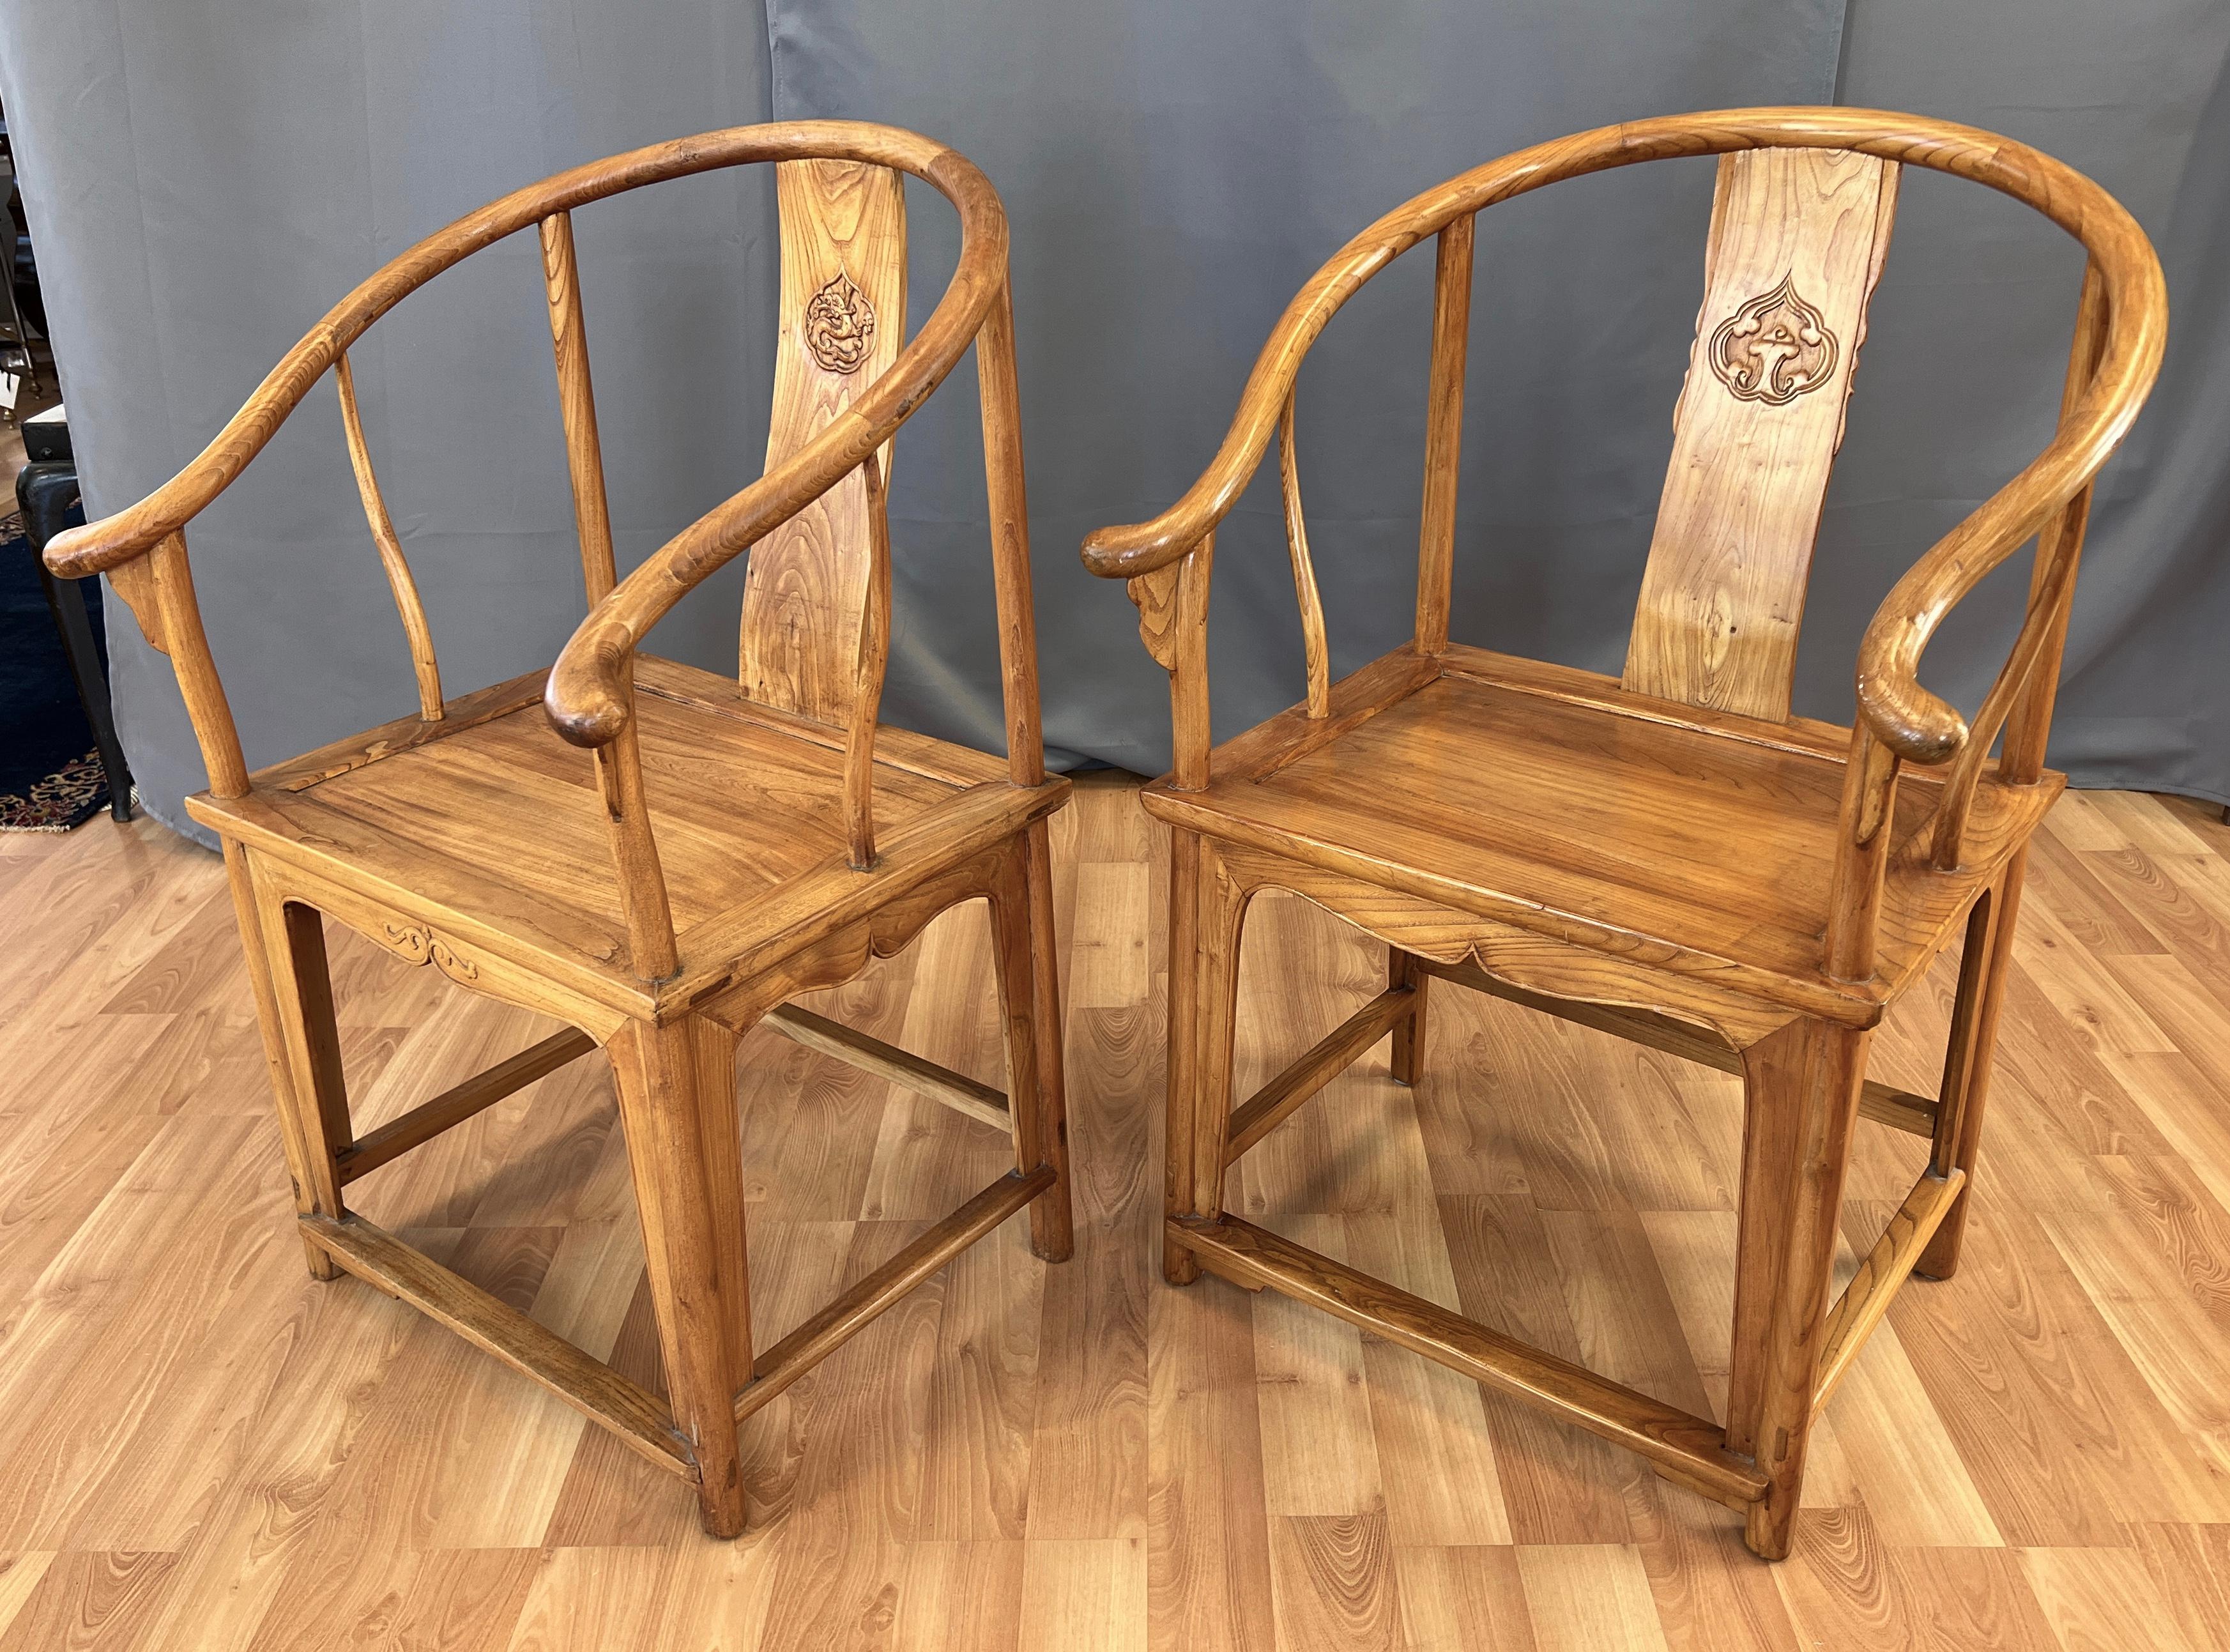 Pair 19th century Chinese Elm wood horseshoe style chairs from the Qing Dynasty era.
Horseshoe back and into arms, carved design on the center of their back panel.
Another carving on it's front skirt, and sides.
 